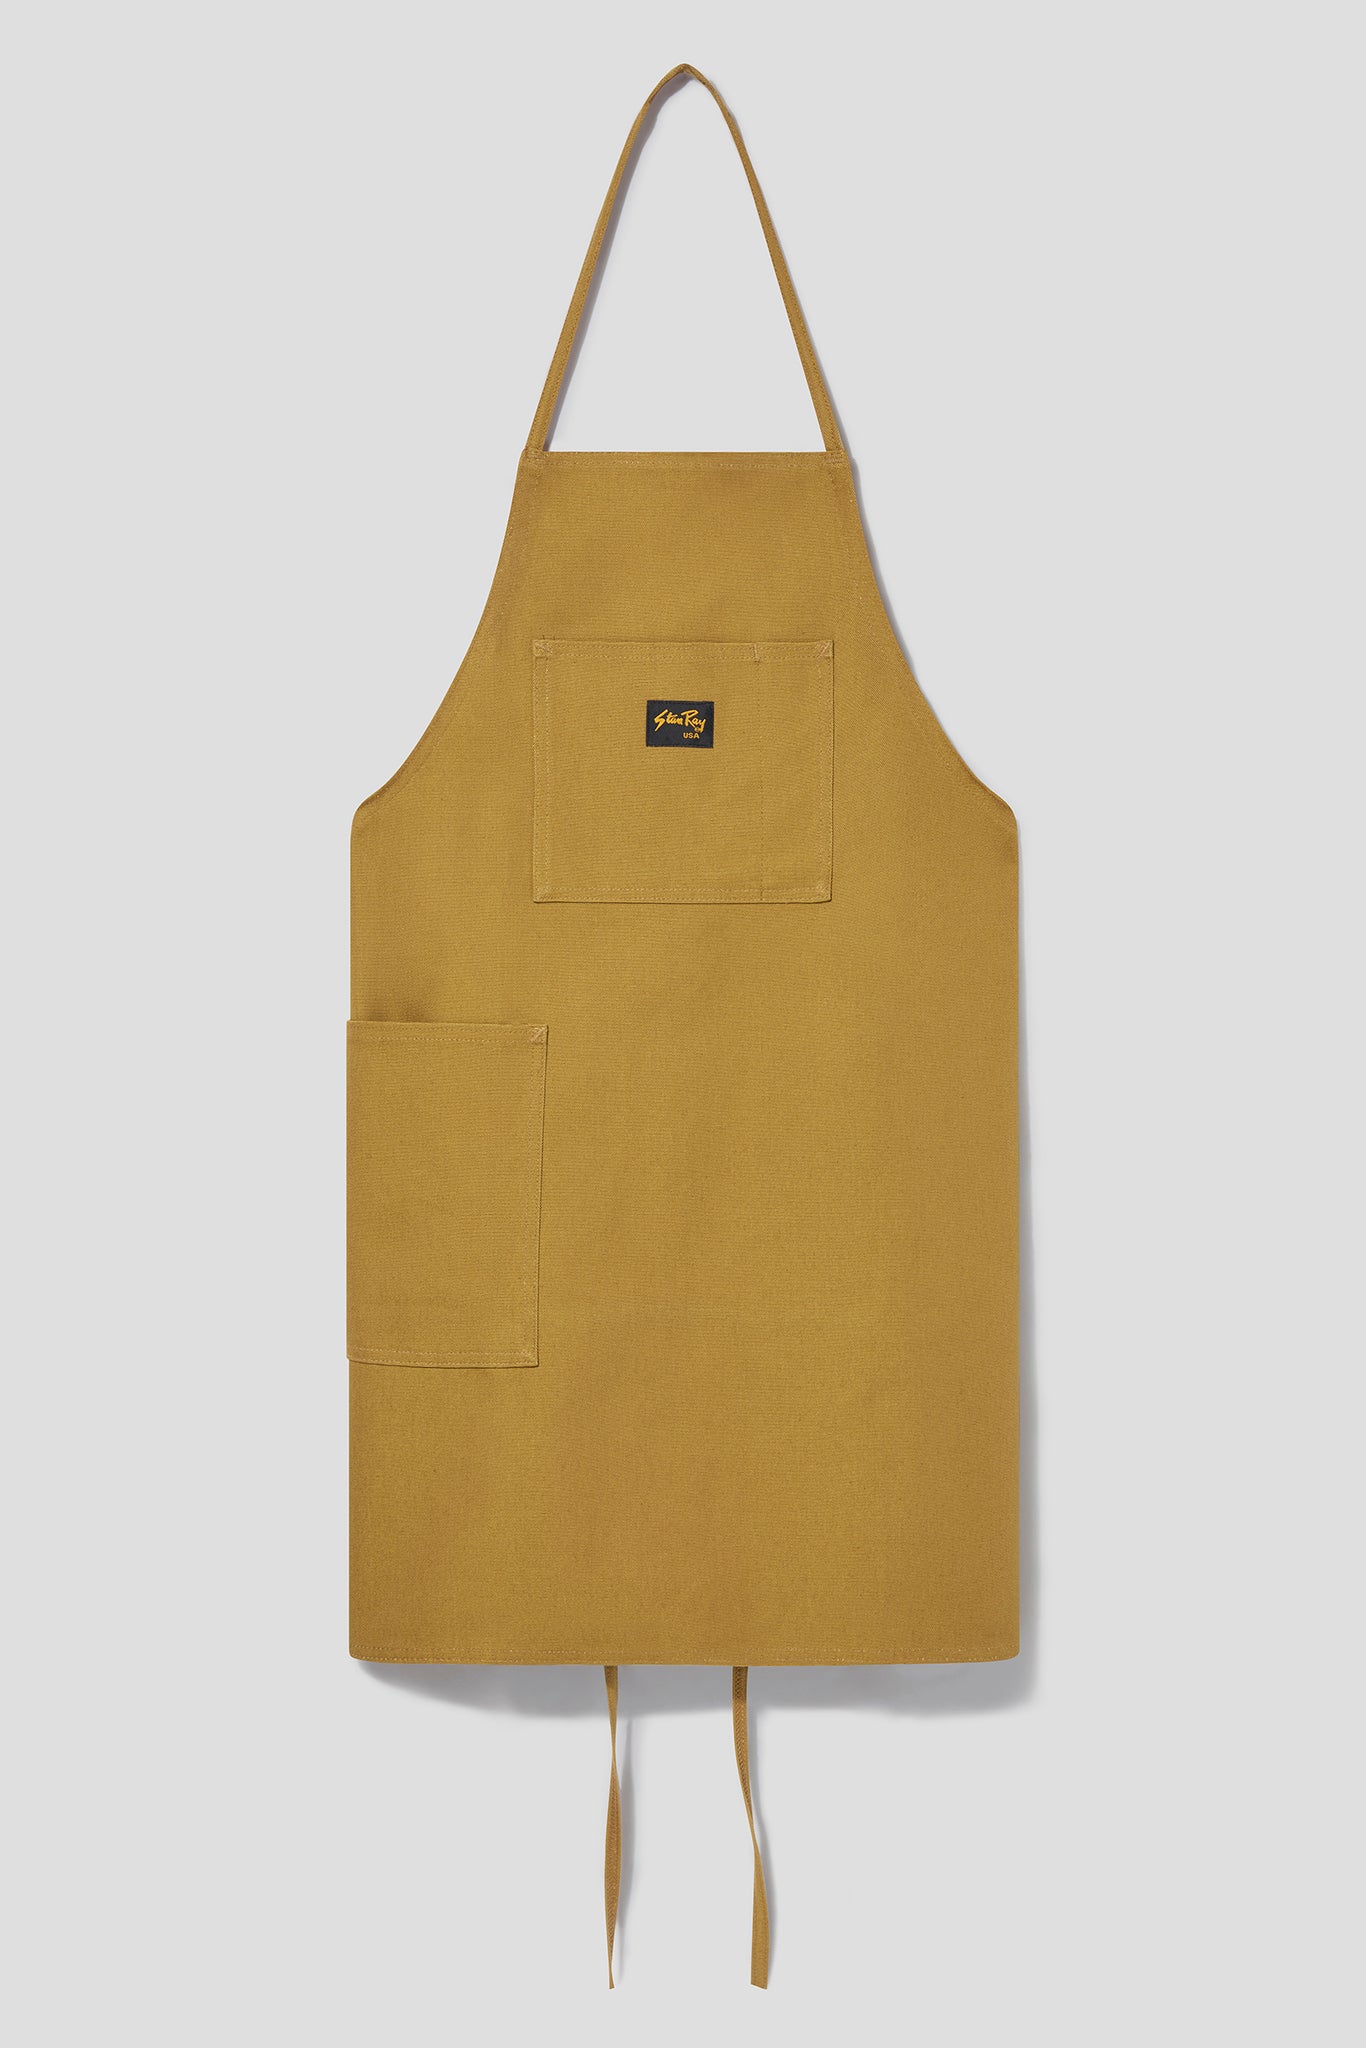 Apron (Brown Duck) - Stan Ray